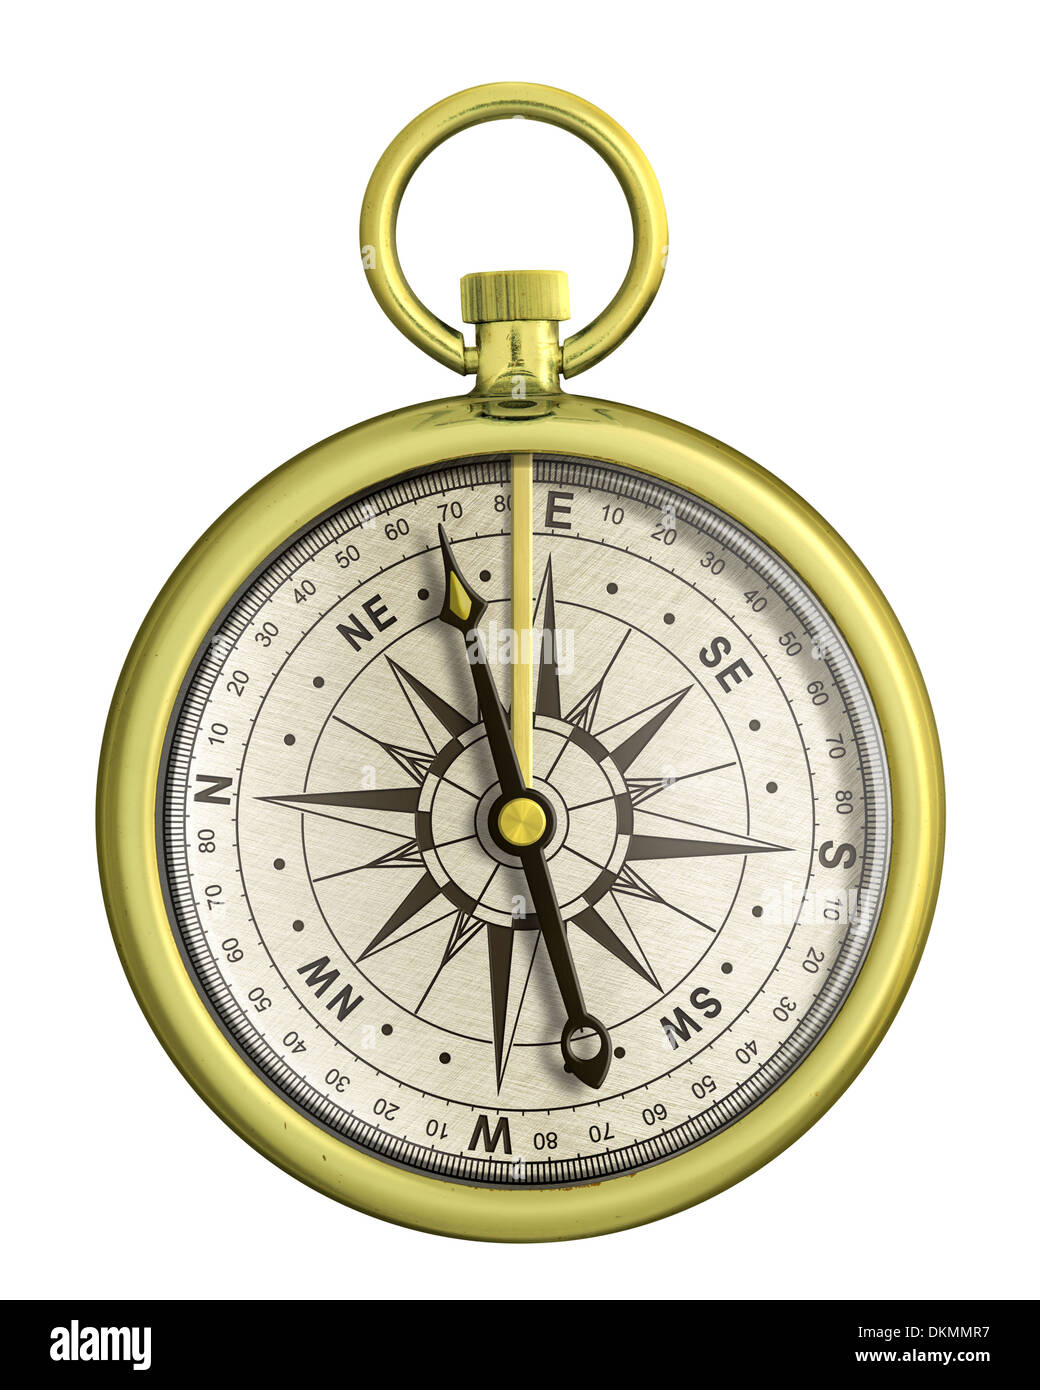 old gold nautical compass isolated Stock Photo